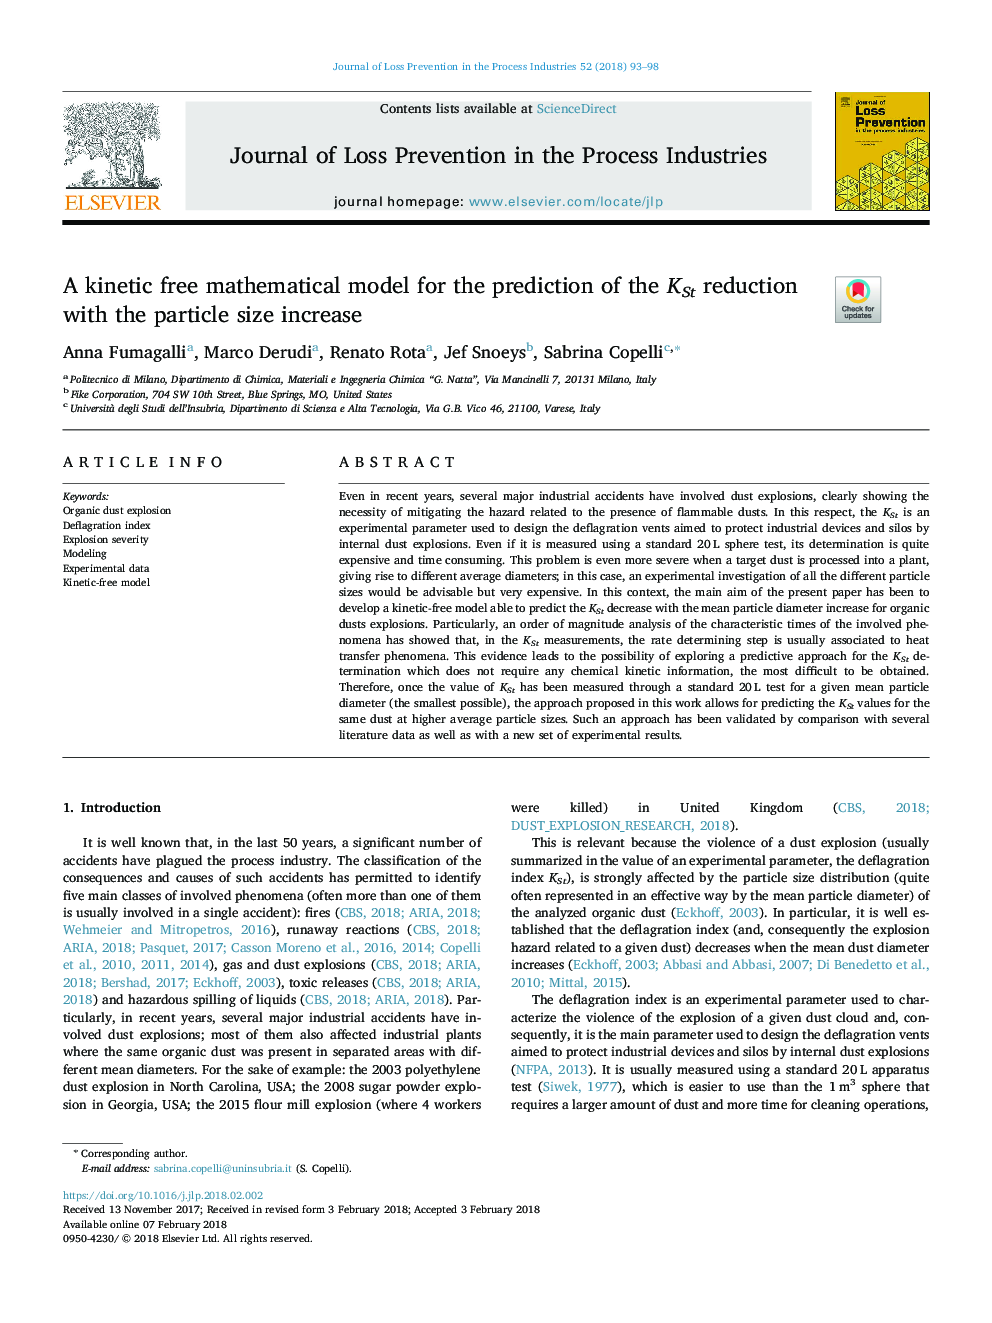 A kinetic free mathematical model for the prediction of the KSt reduction with the particle size increase